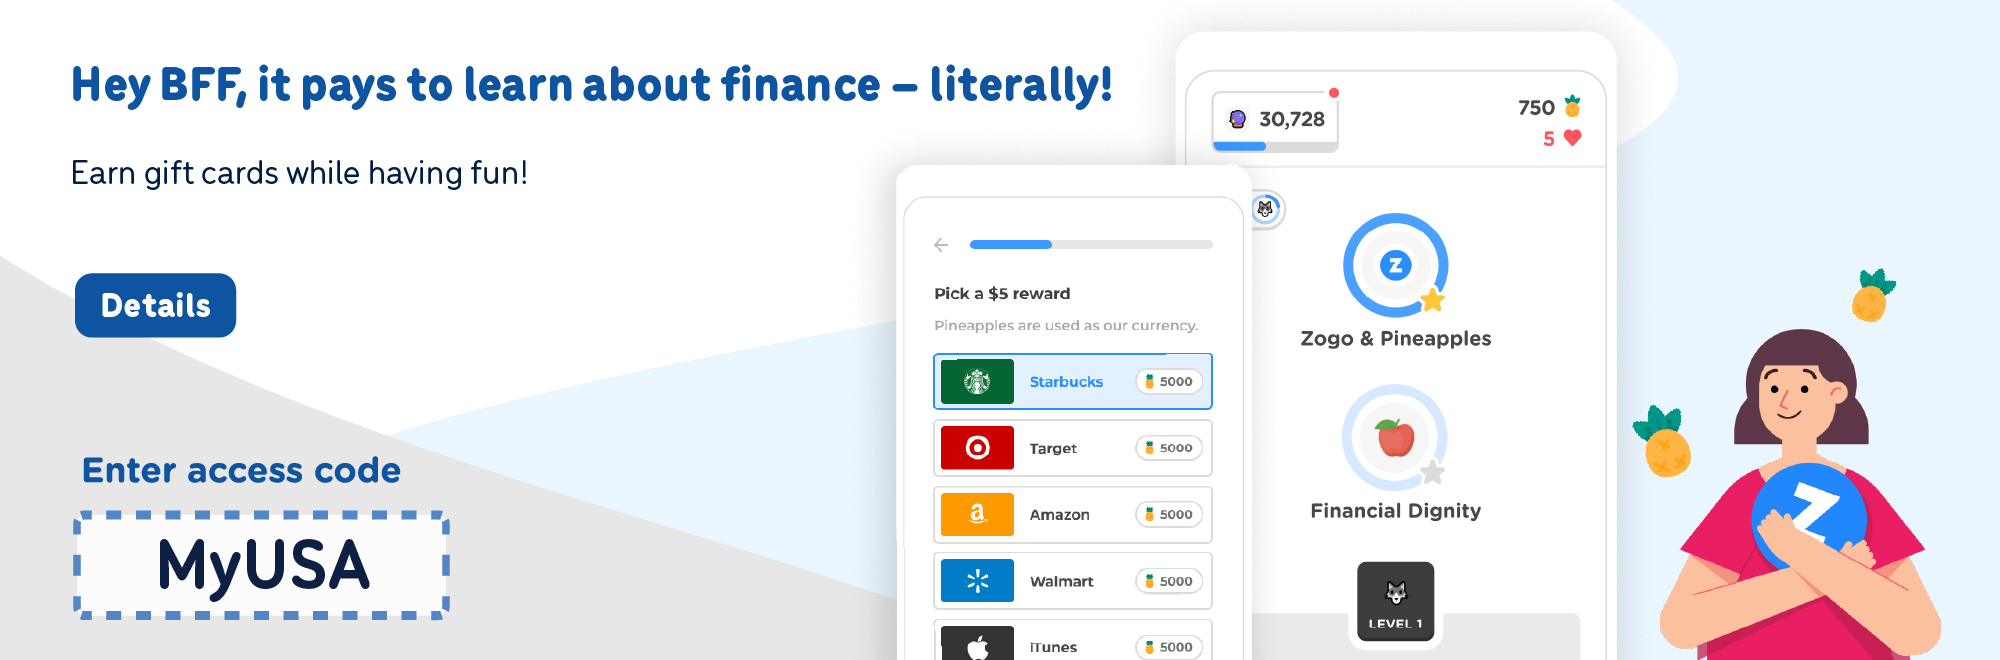 Learn how you can earn gift cards while having fun learning about finance with Zogo. Use access code MyUSA.